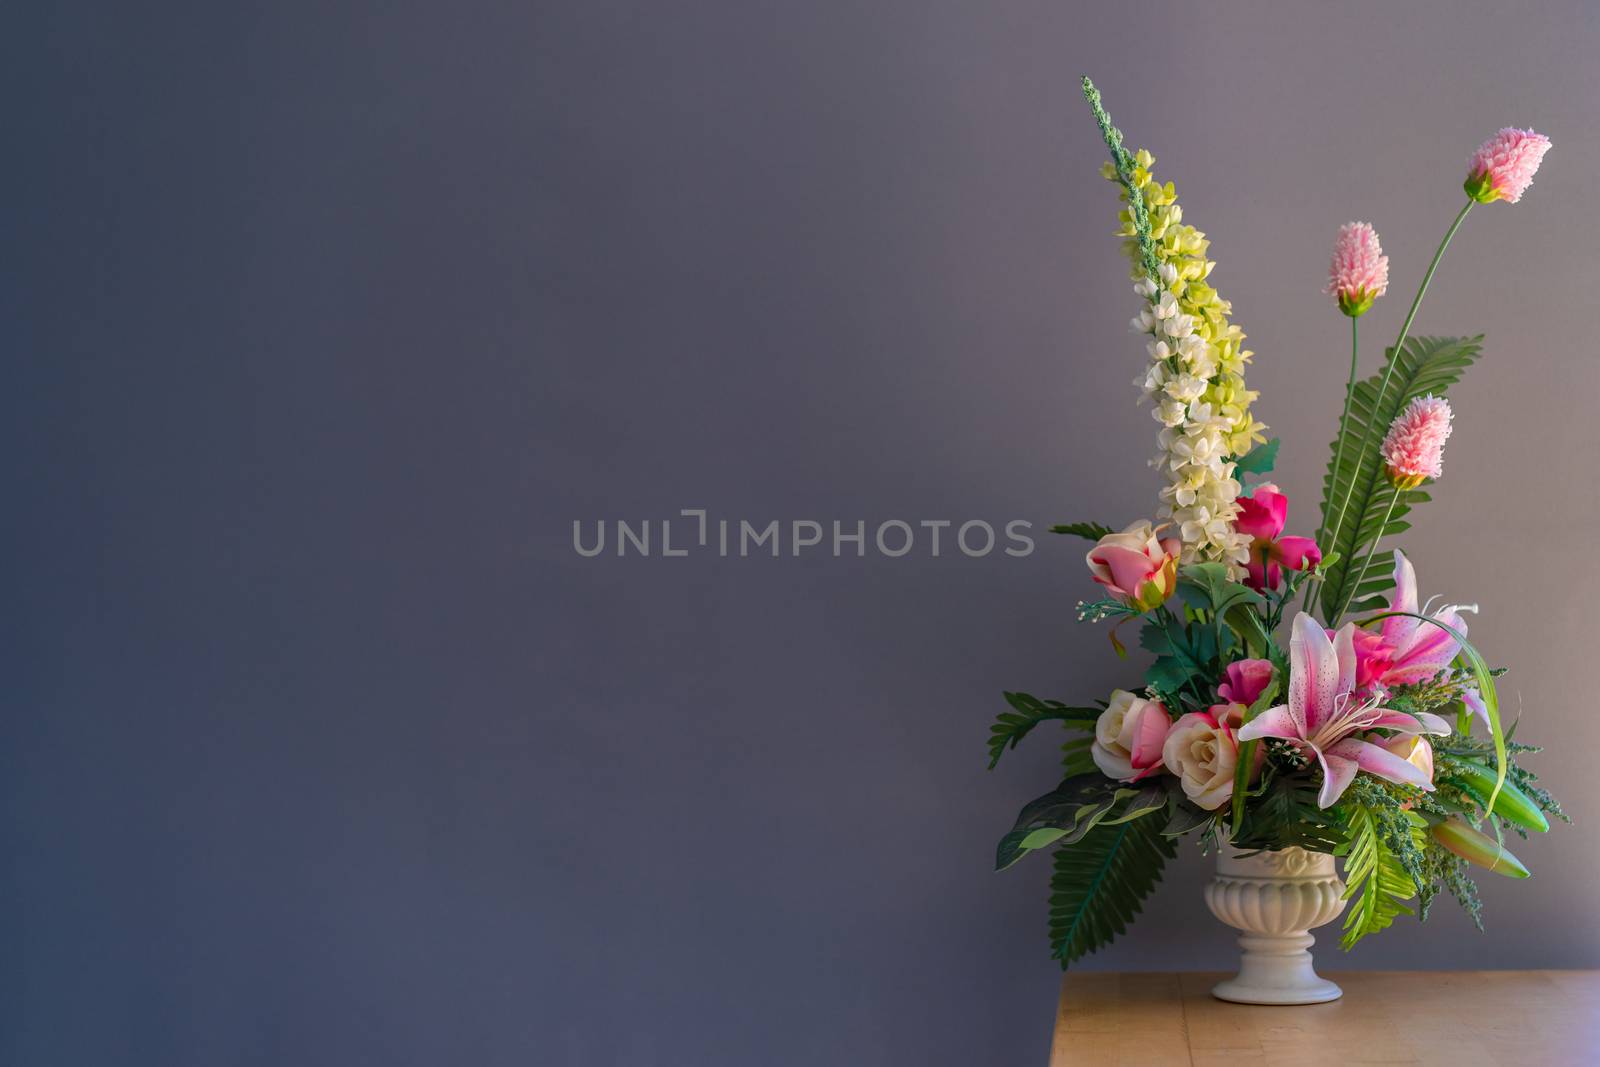 Fake flowers in a vase on wood table with gray background by domonite